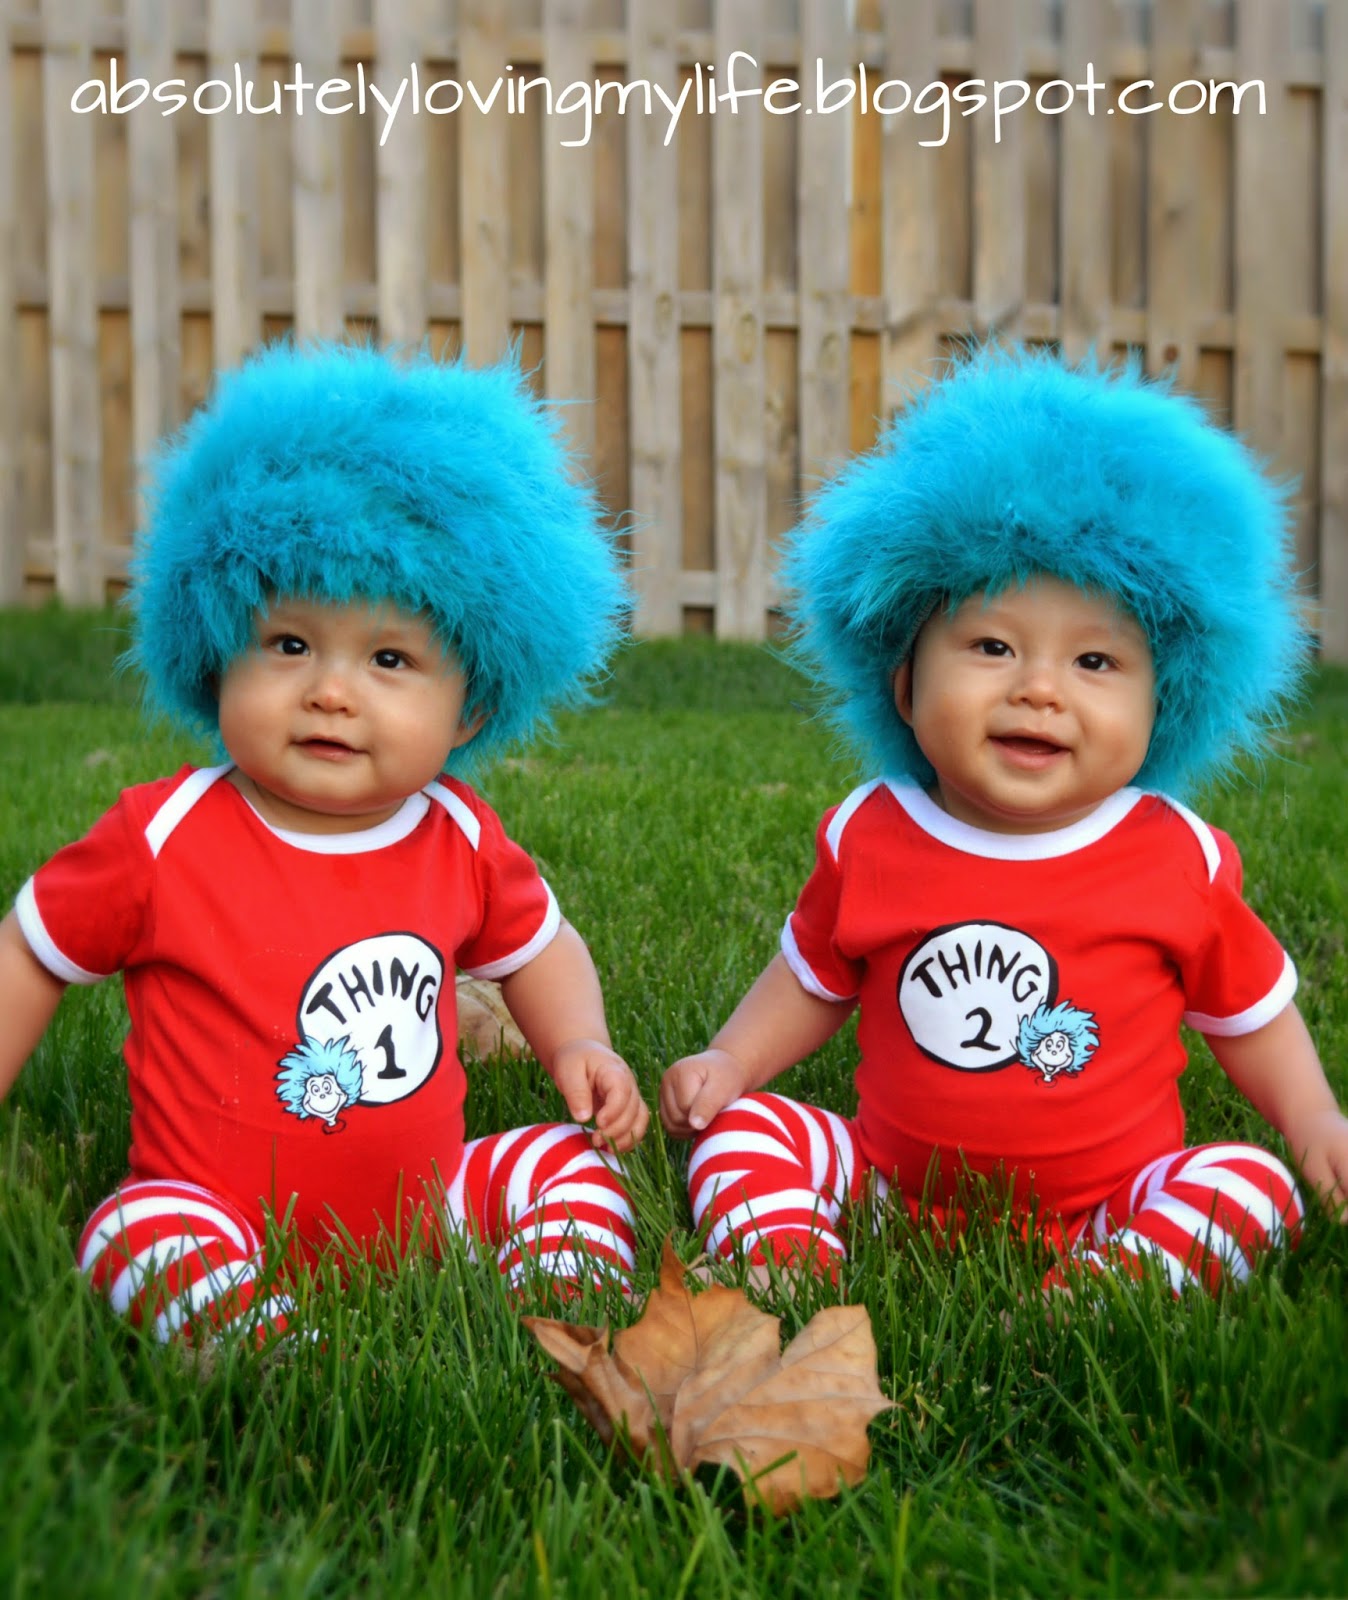 Loving Life: Our Twins' First Halloween Costumes - Thing 1 and Thing 2